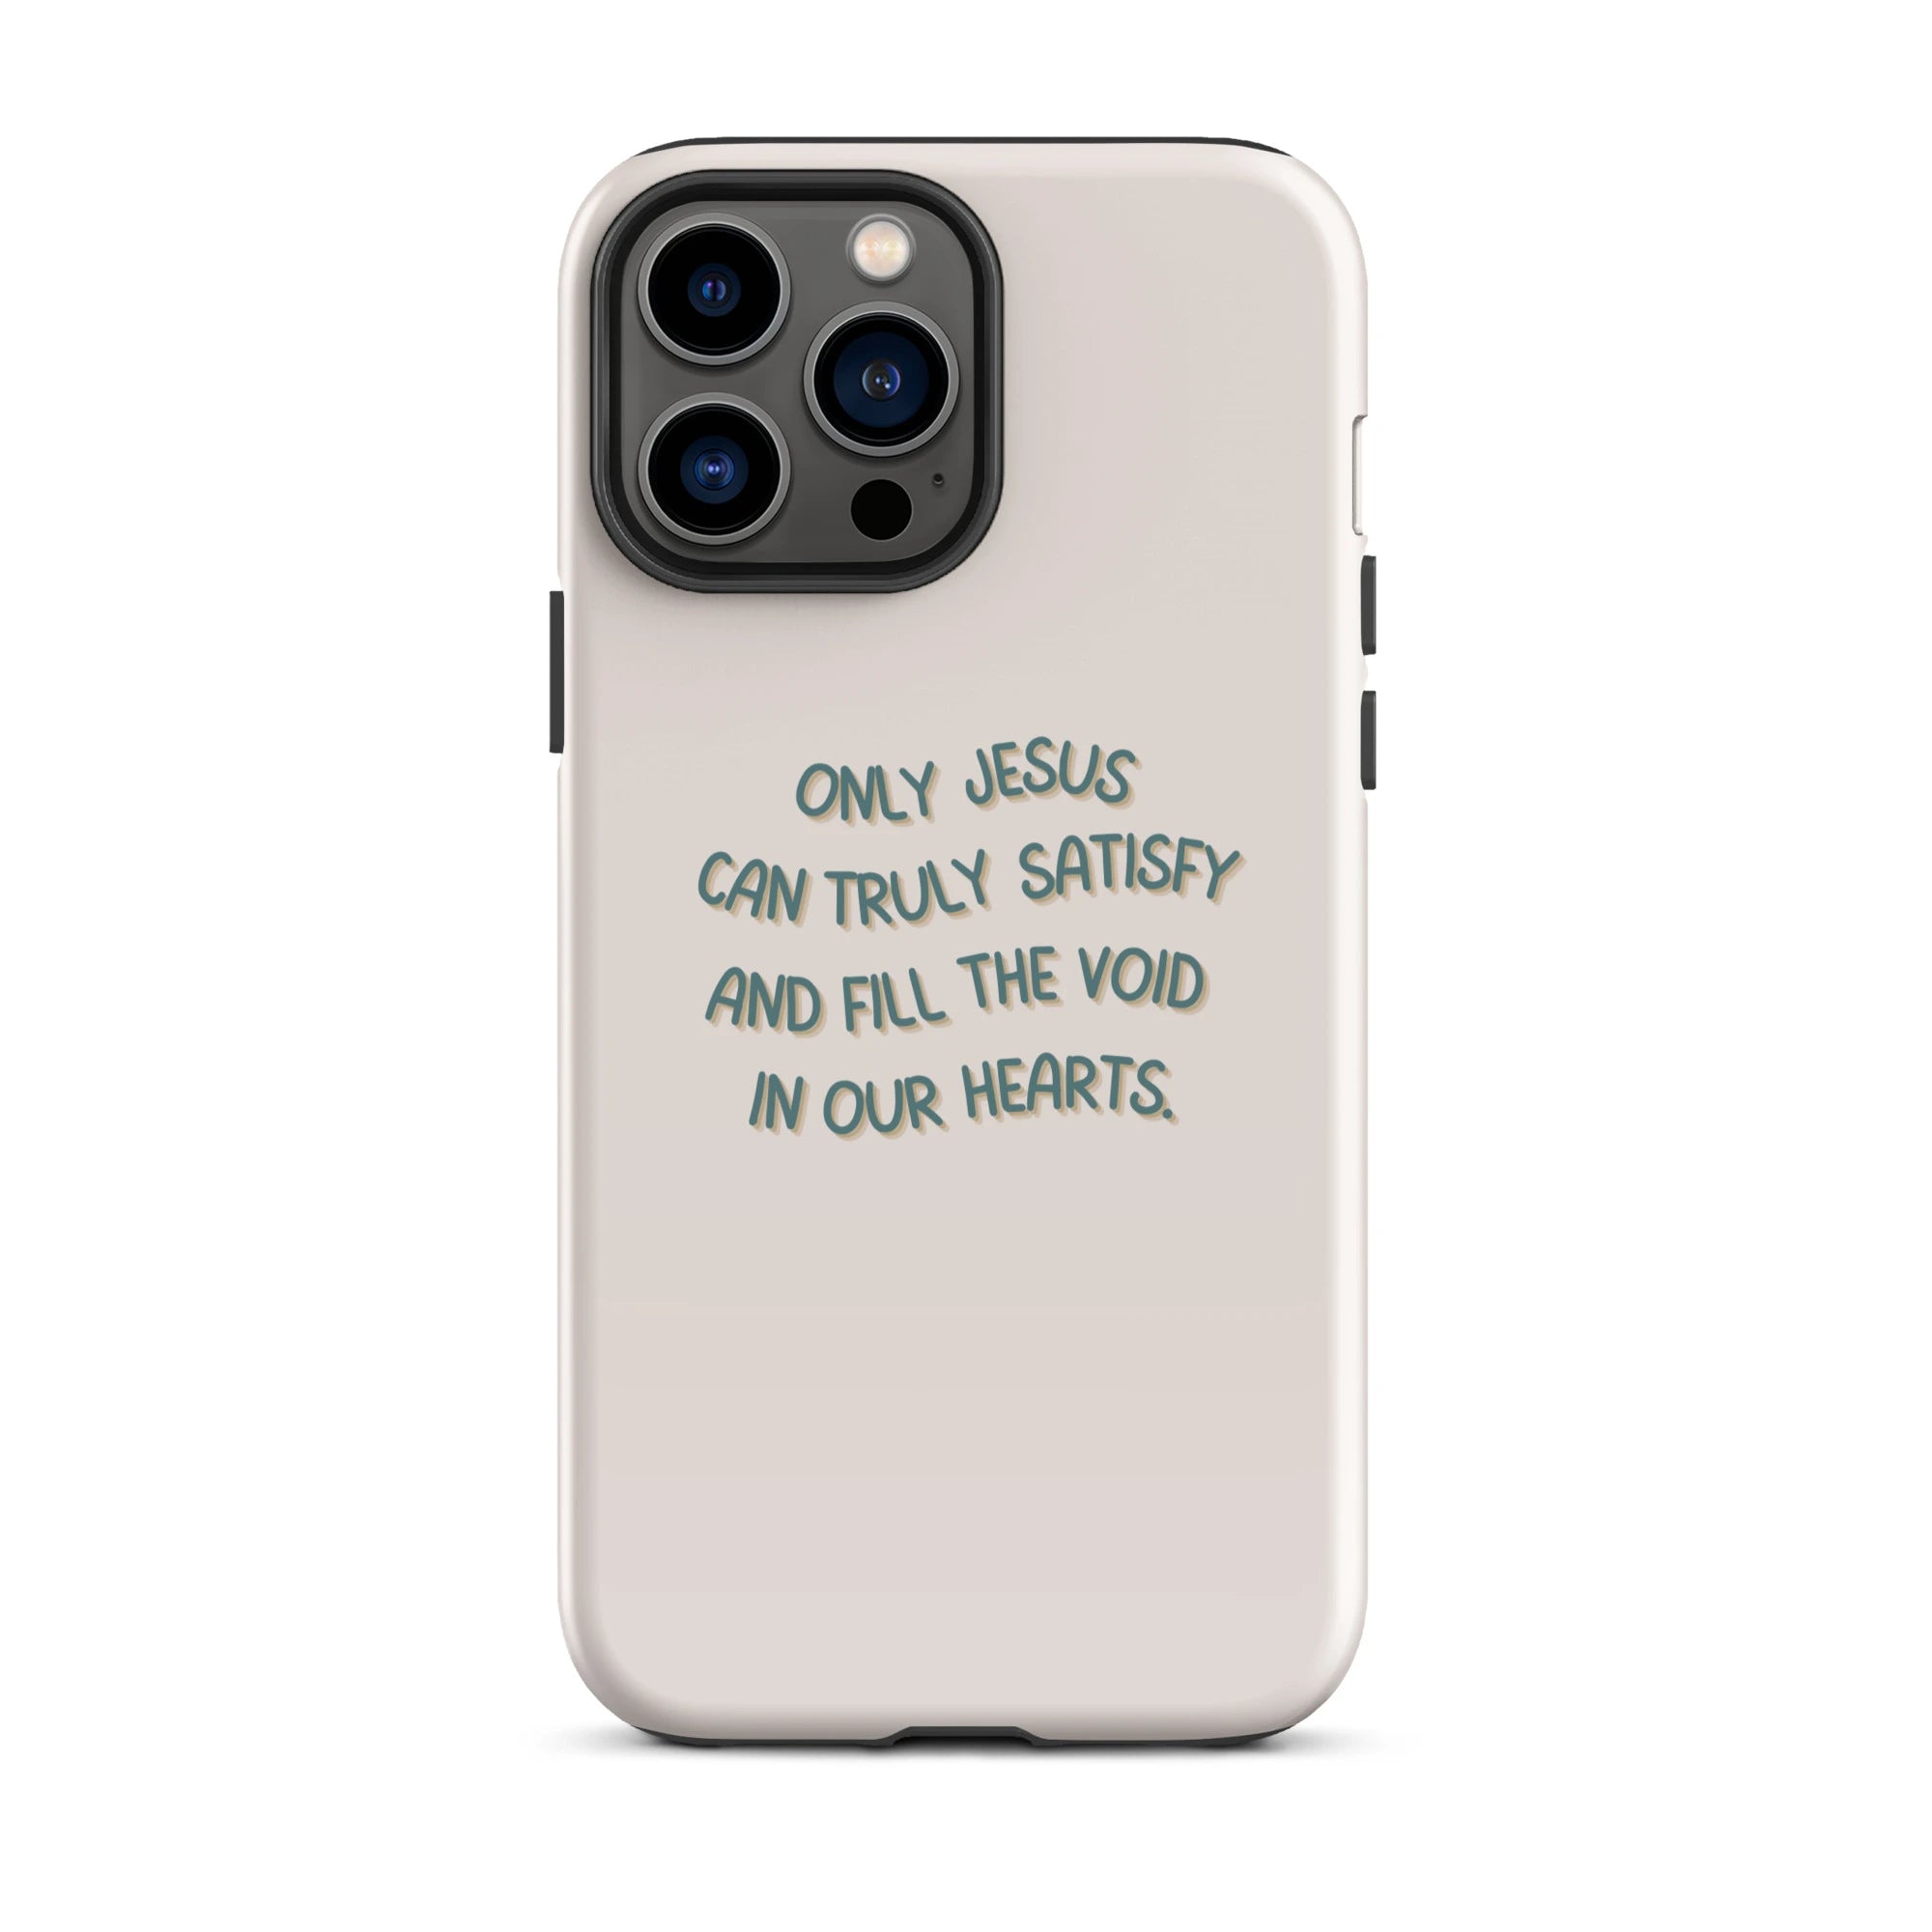 Back view of an iPhone case with a spiritual quote about Jesus' fulfillment, in elegant, simple script.